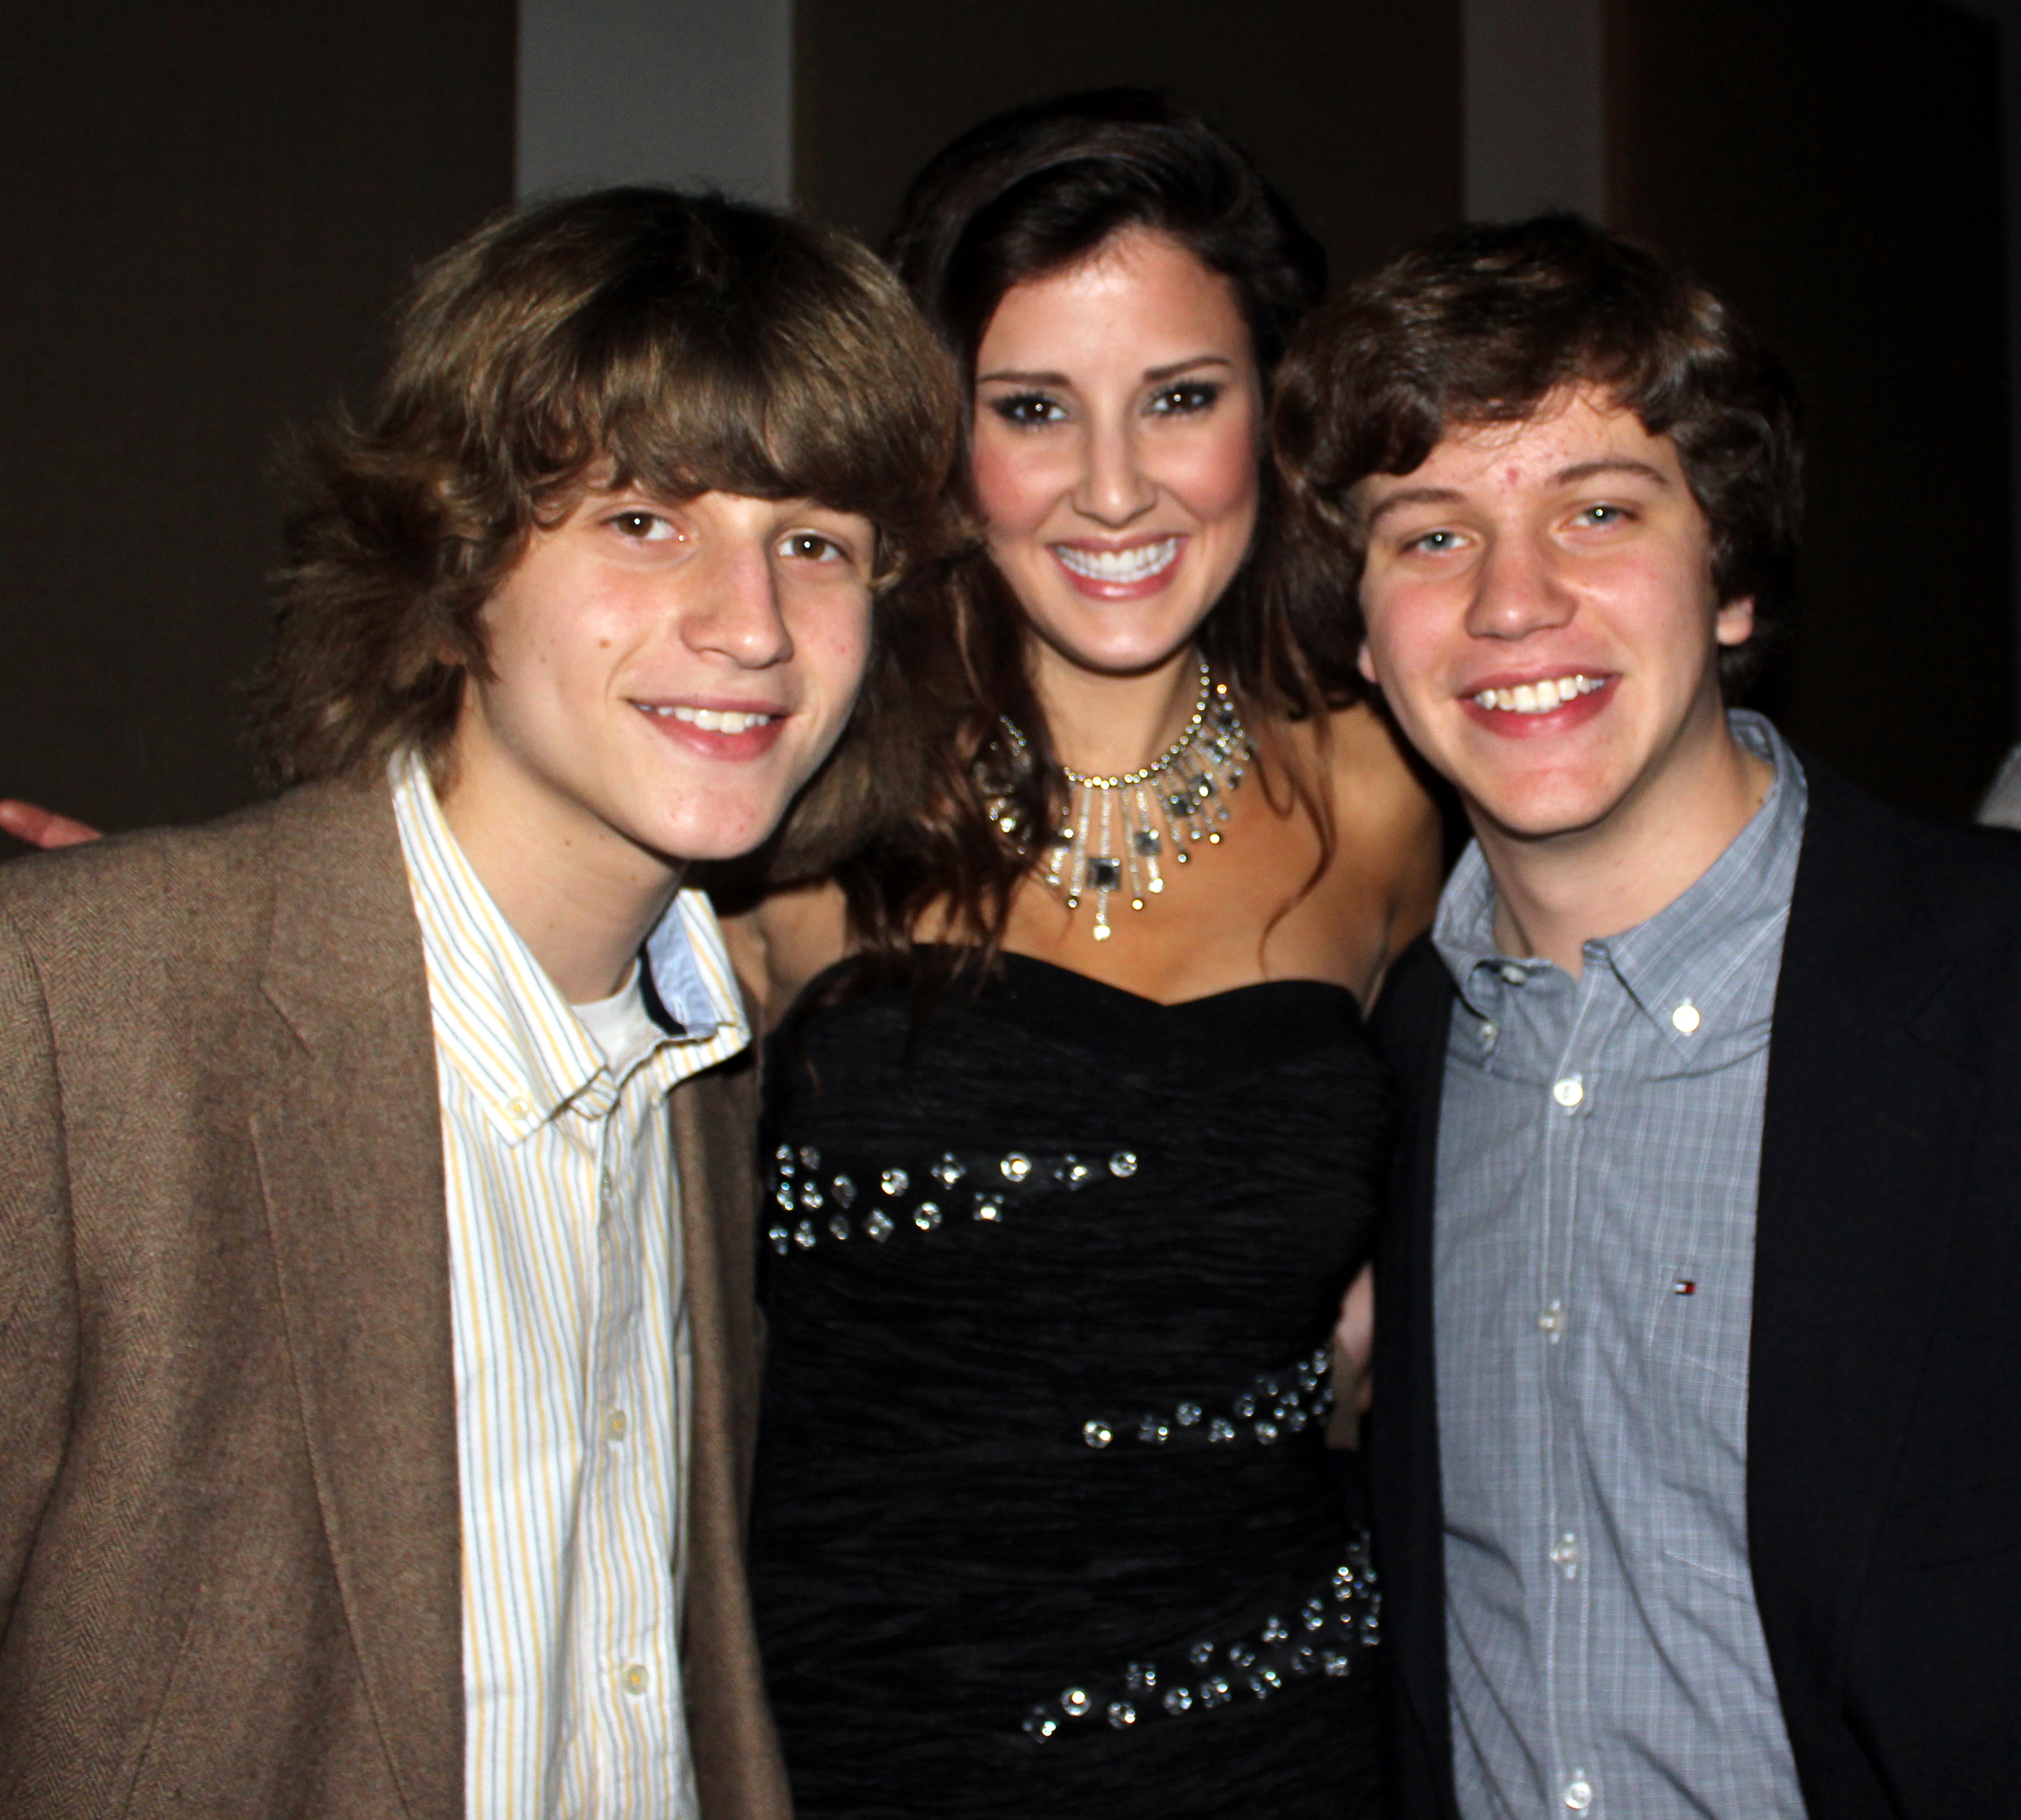 Andrew Williams and Ryan Williams with Zoe Myers at the premiere of her new music video, 